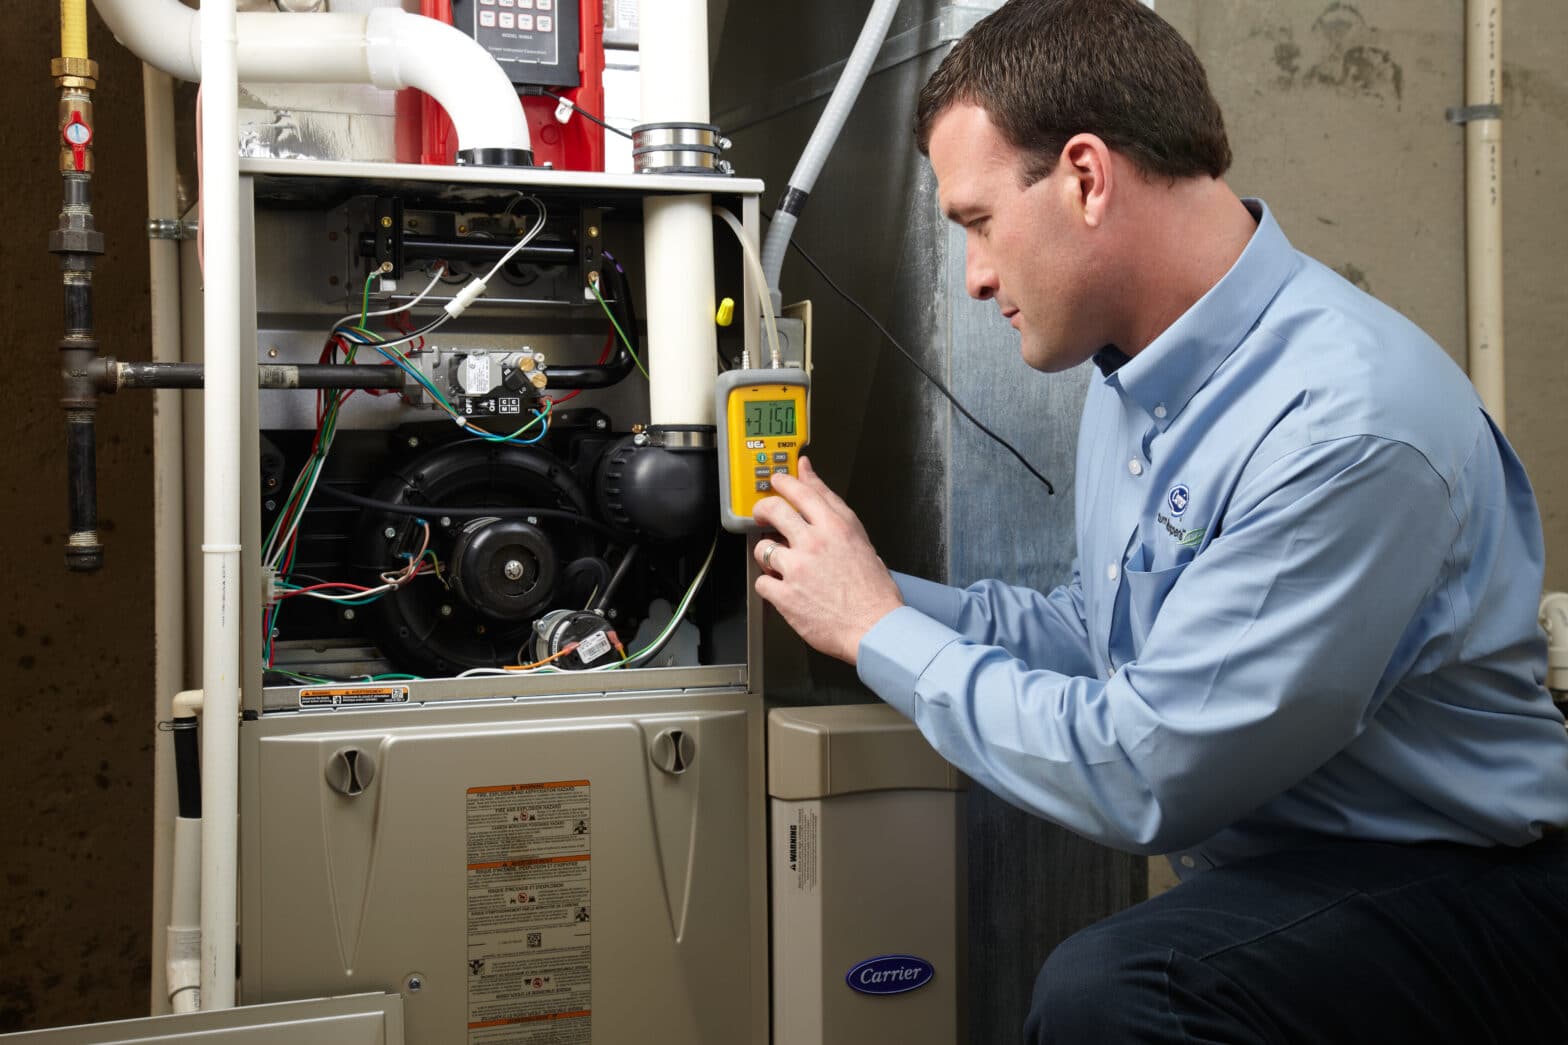 New Furnace Cost Guide - Furnace Replacement Cost